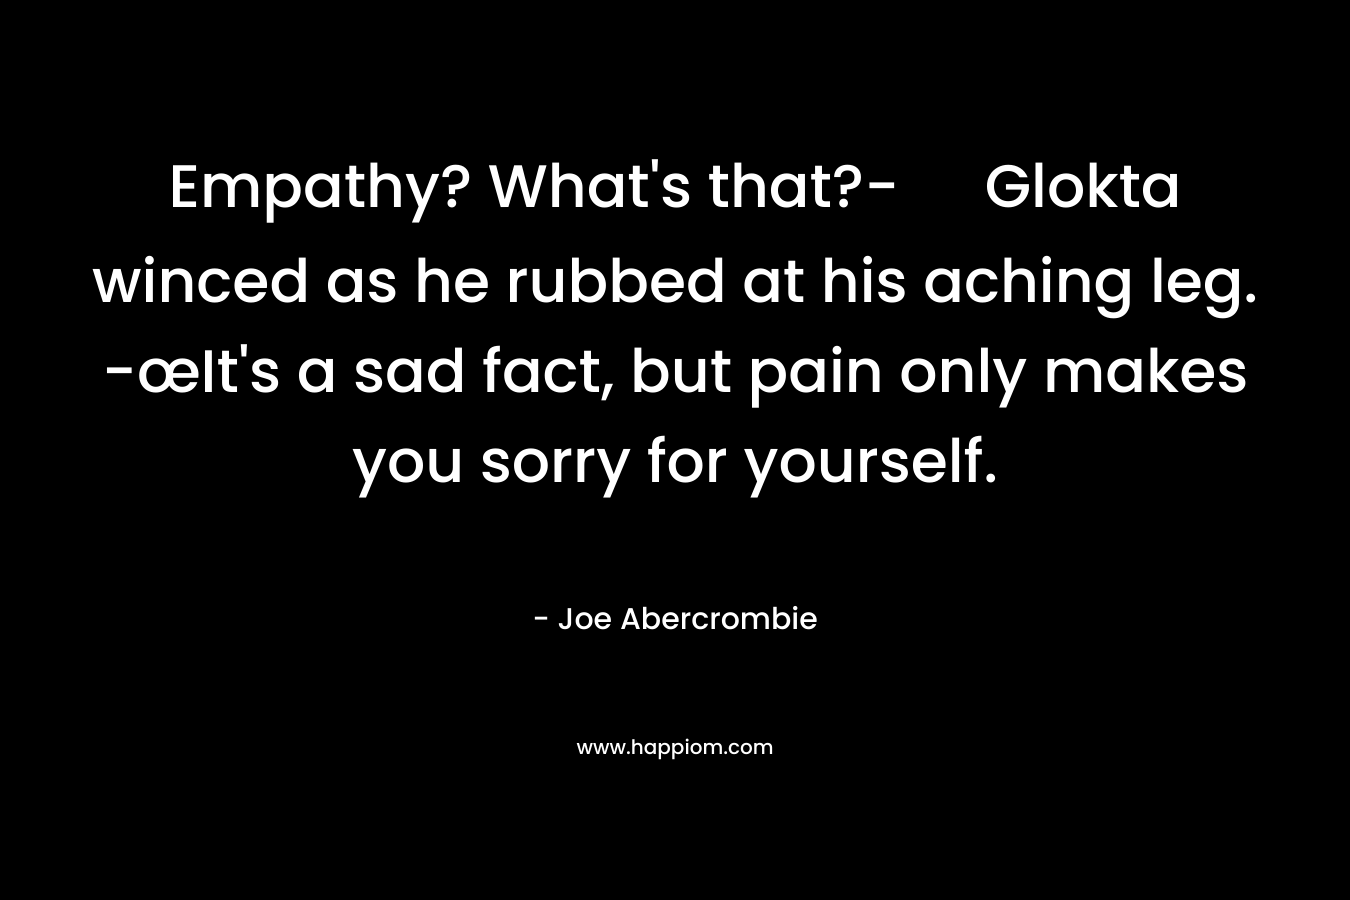 Empathy? What's that?- Glokta winced as he rubbed at his aching leg. -œIt's a sad fact, but pain only makes you sorry for yourself.